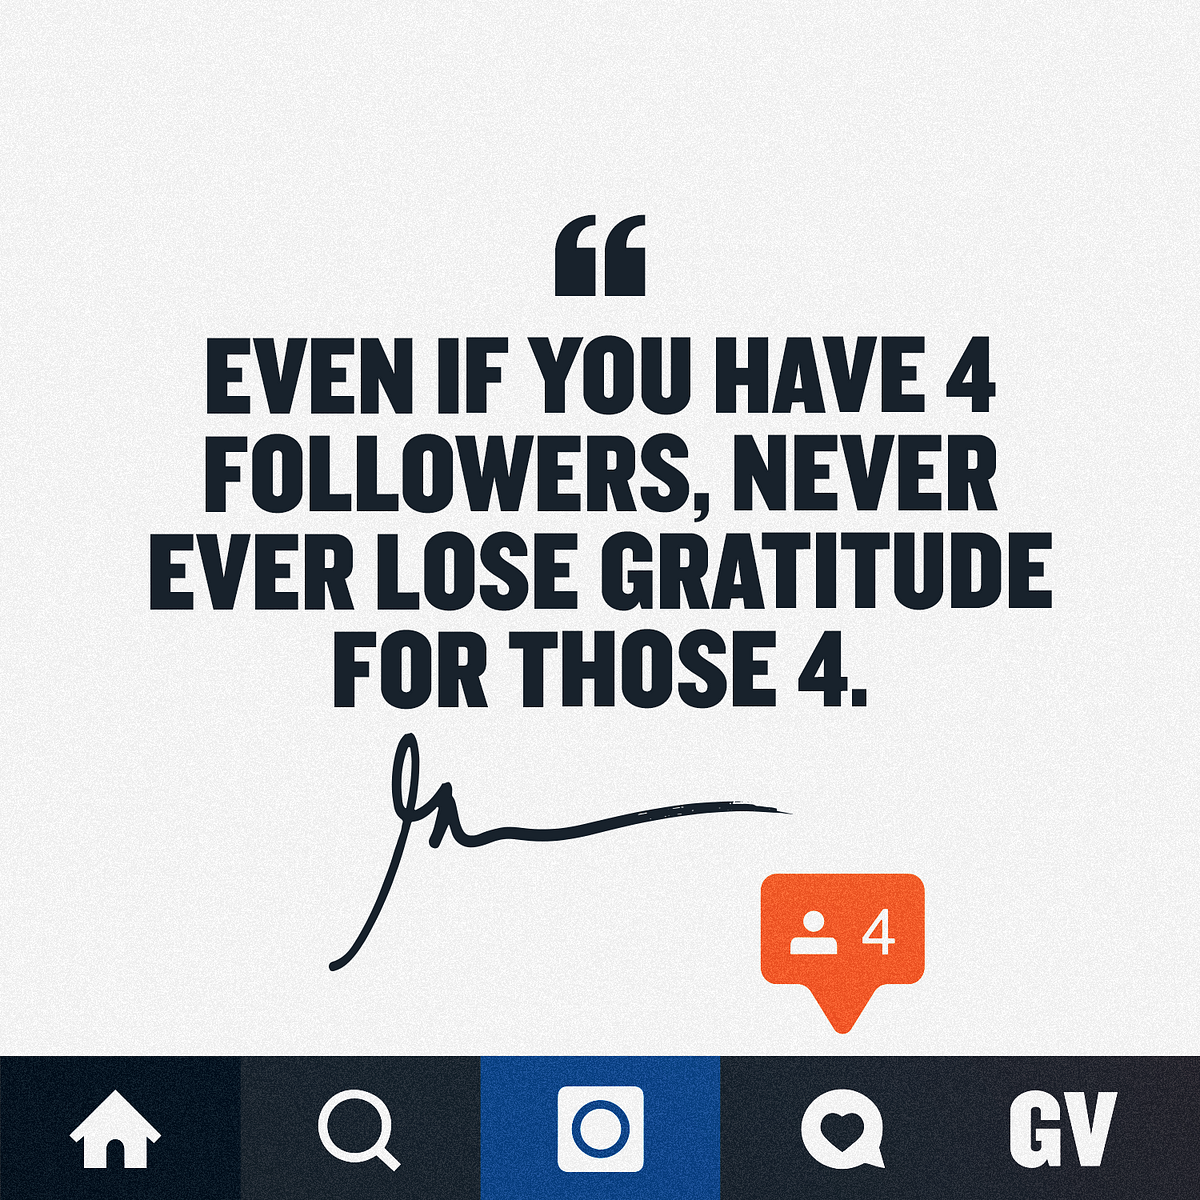 Most Instagram Followers Right Now - How To Retrieve A ... - 1200 x 1200 png 1322kB